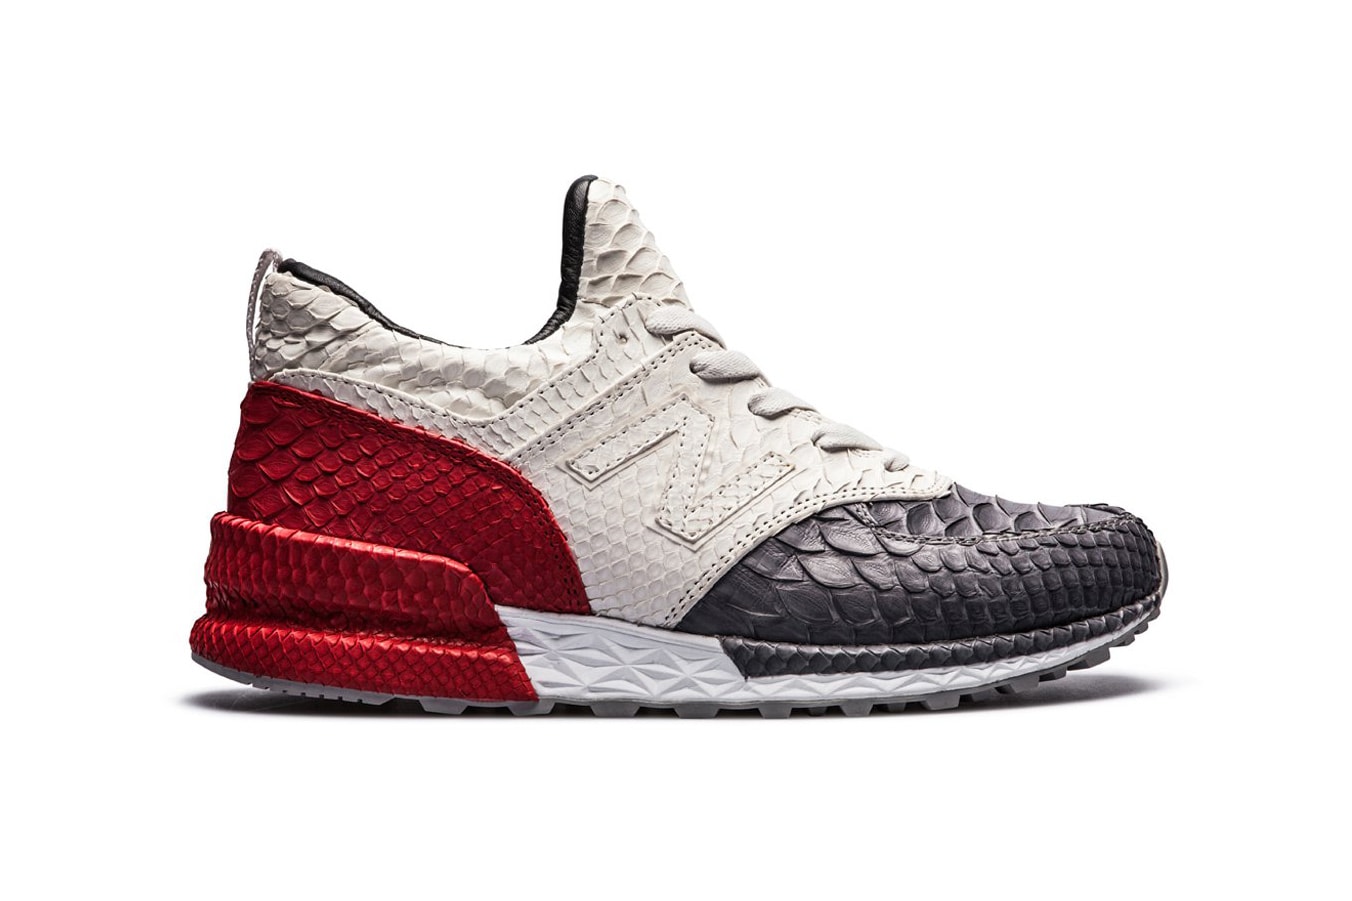 The Shoe Surgeon New Balance 574 Sport Python Sneakers Shoes Footwear Collaboration